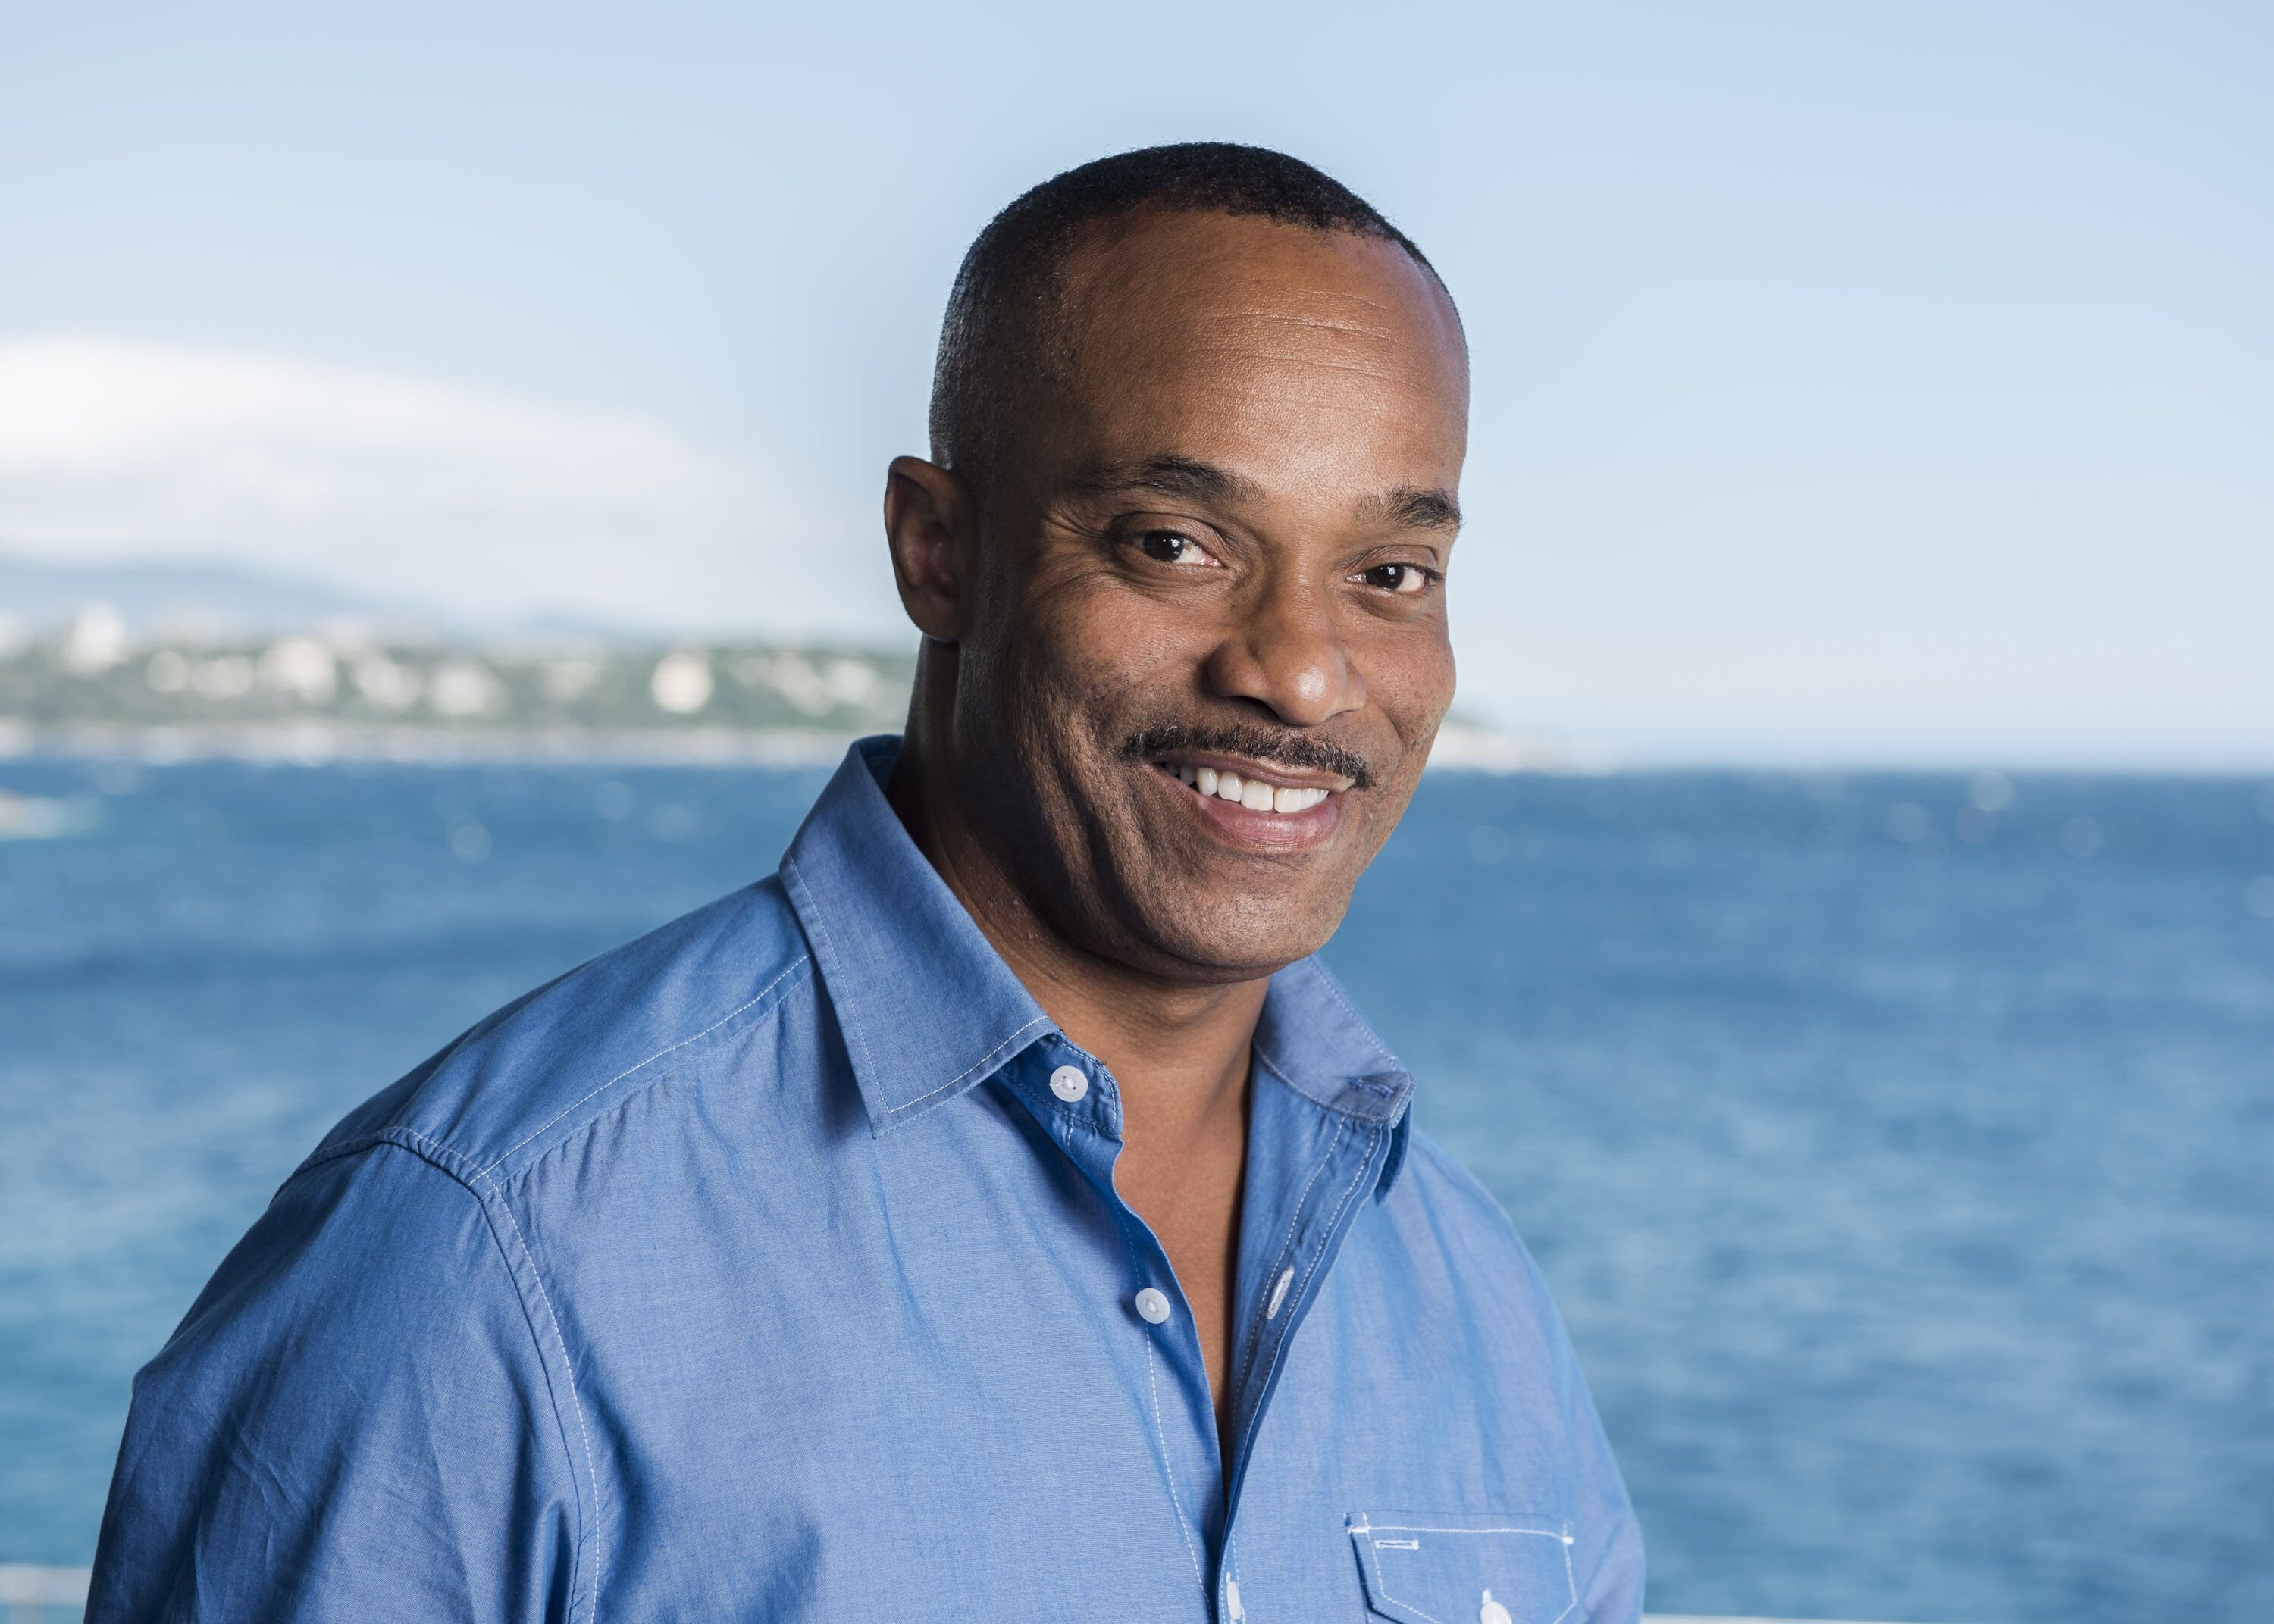 Actor Rocky Carroll poses for a portrait session during the 52nd Monte Carlo TV Festival on June 12, 2012 in Monaco, Monaco | Photo: Getty Images